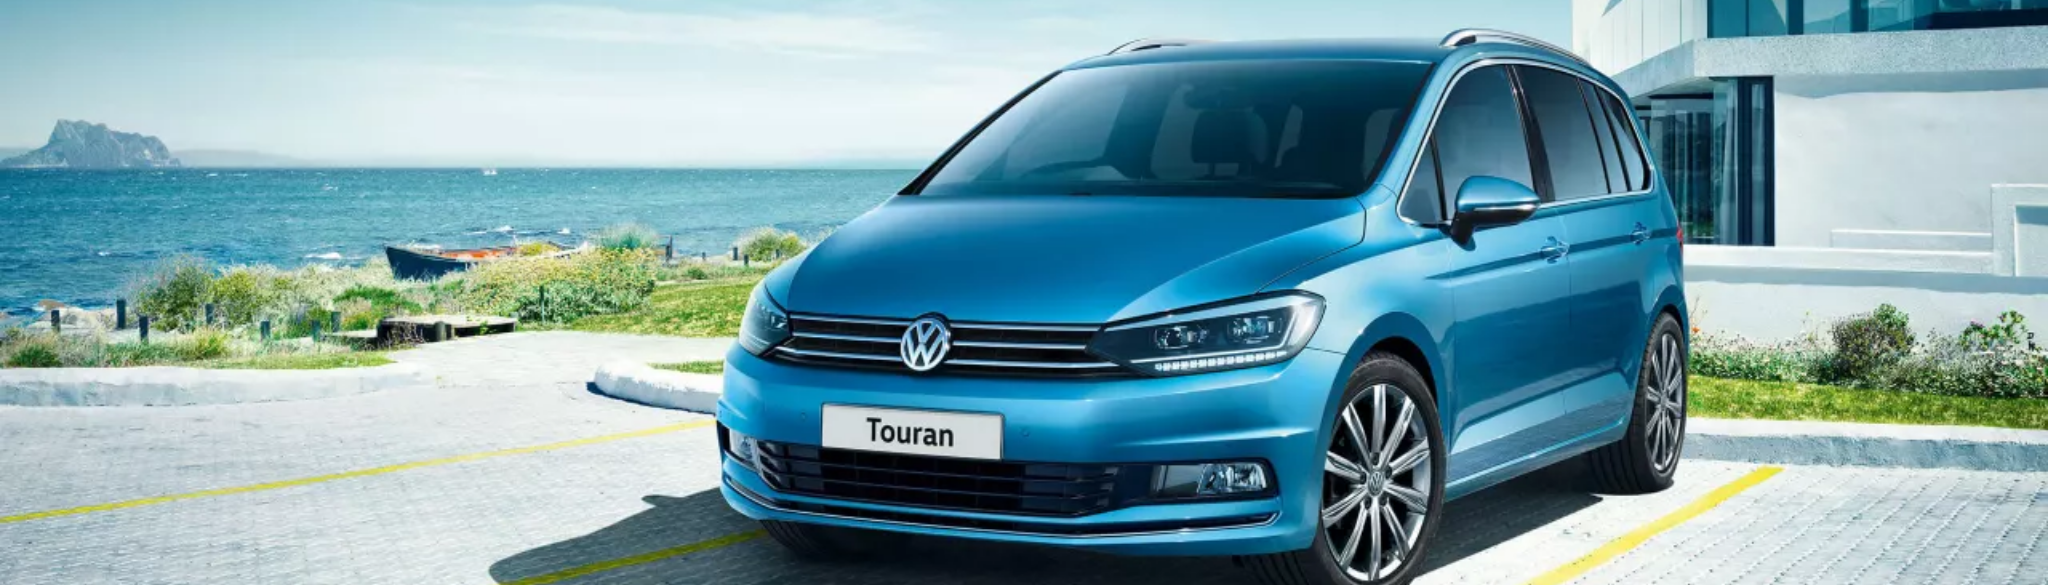 Blue Volkswagen Touran parked by waterfront